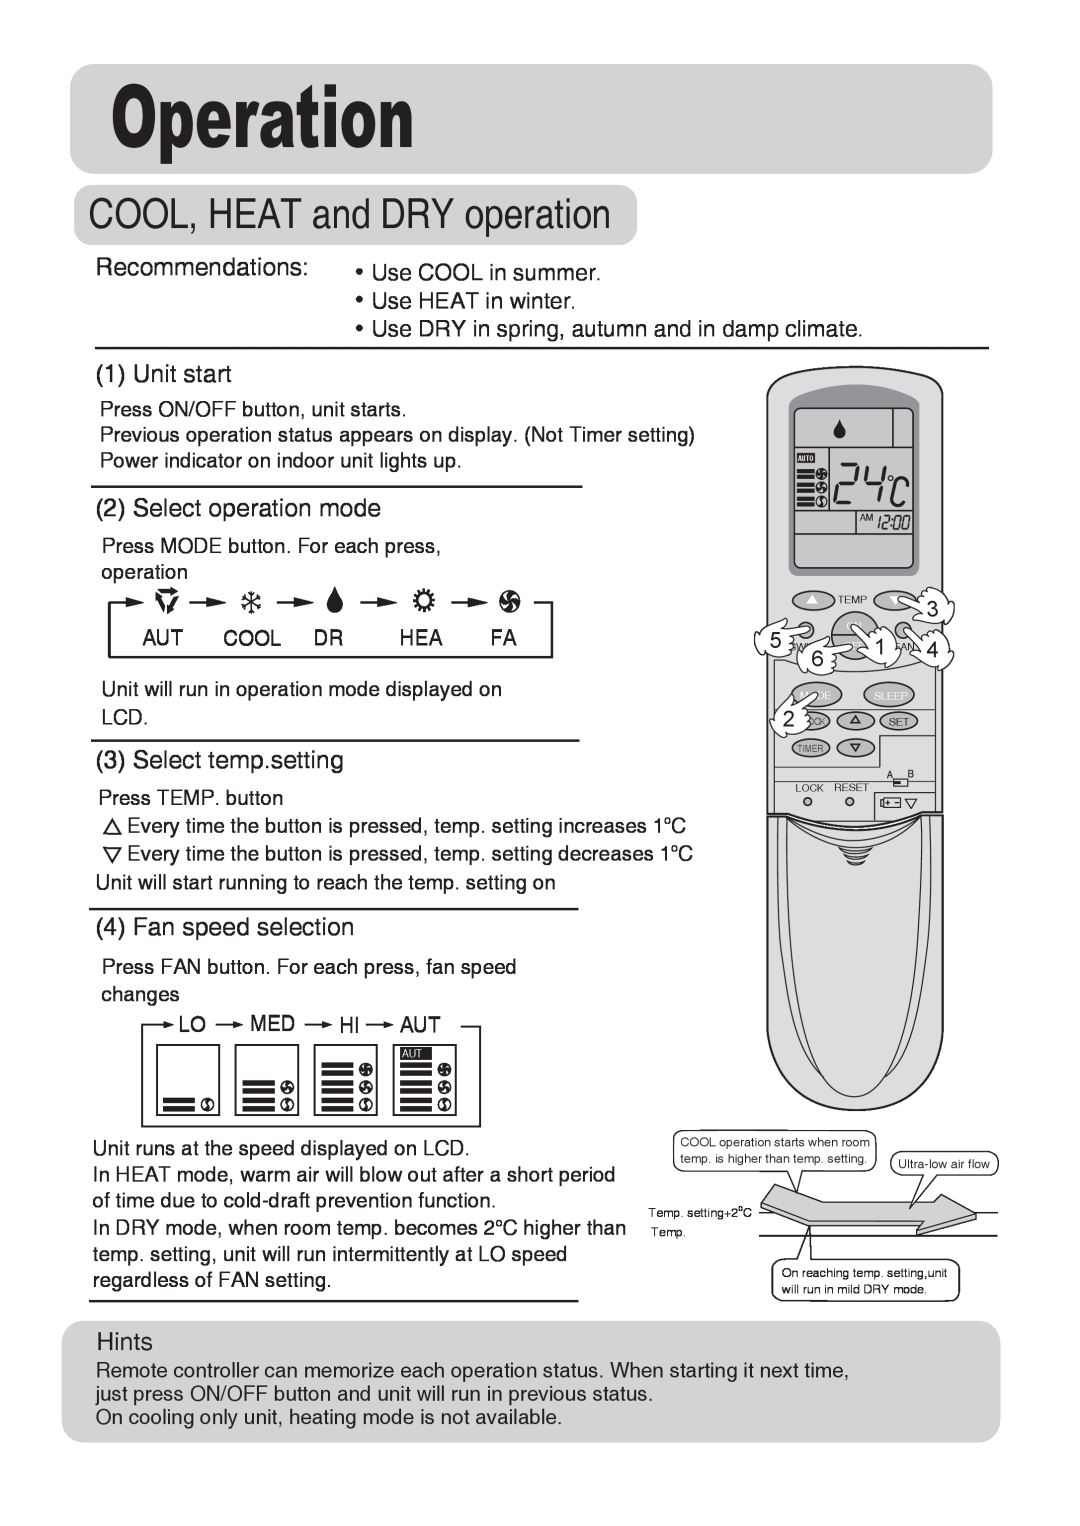 Haier AU162AFNAA manual COOL, HEAT and DRY operation, Operation, Recommendations, Unit start, Select operation mode, Hints 